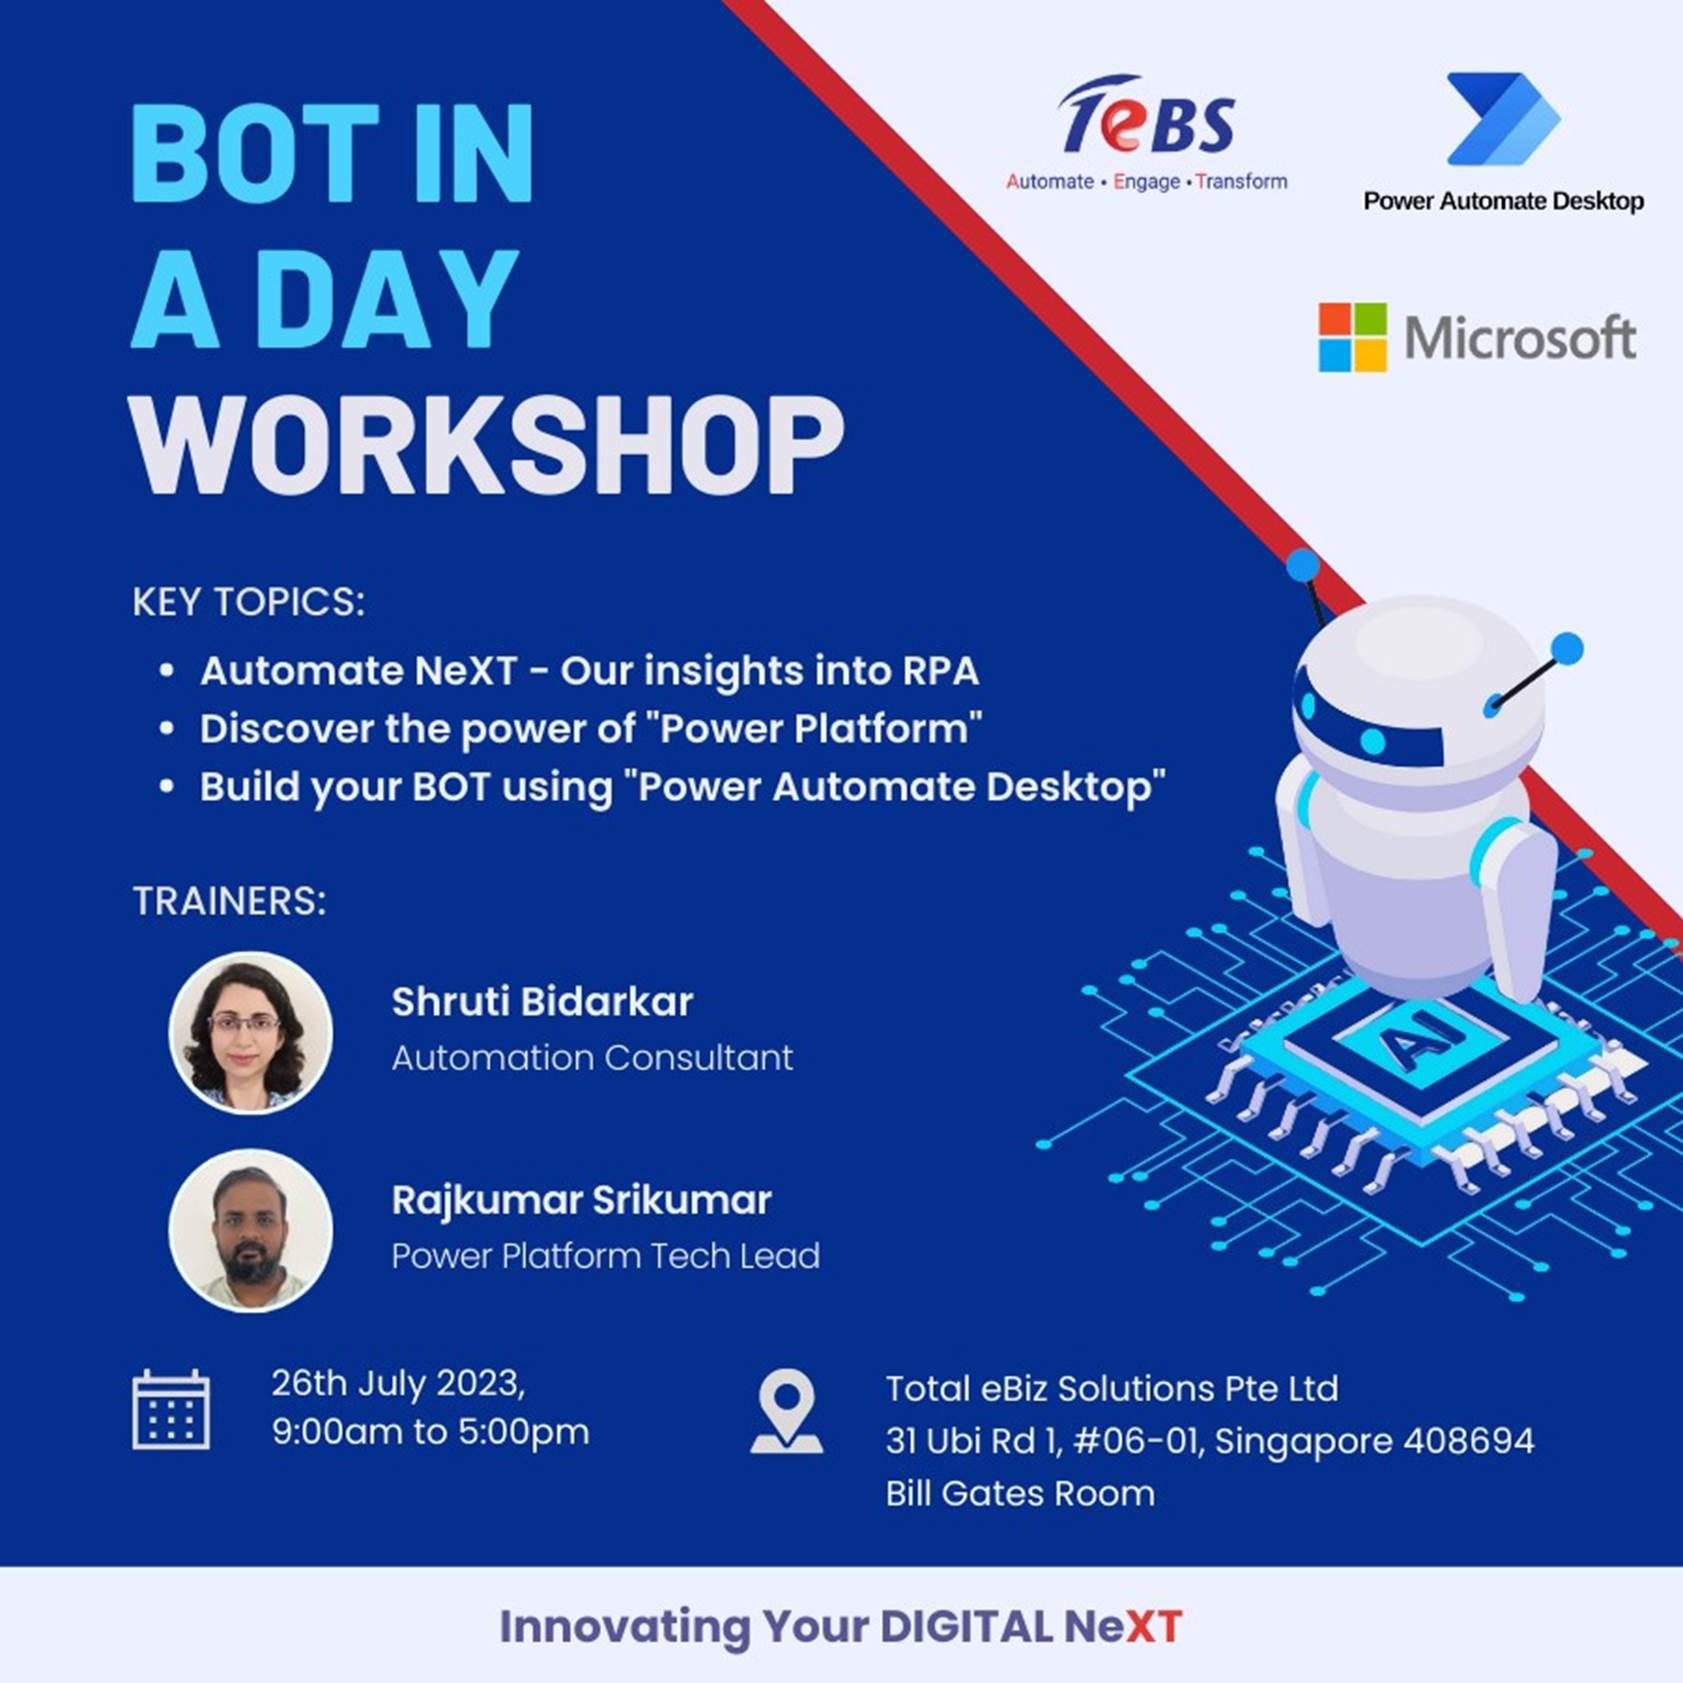 Bot in a Day Workshop Equips Singapore Government Agencies with RPA Capabilities